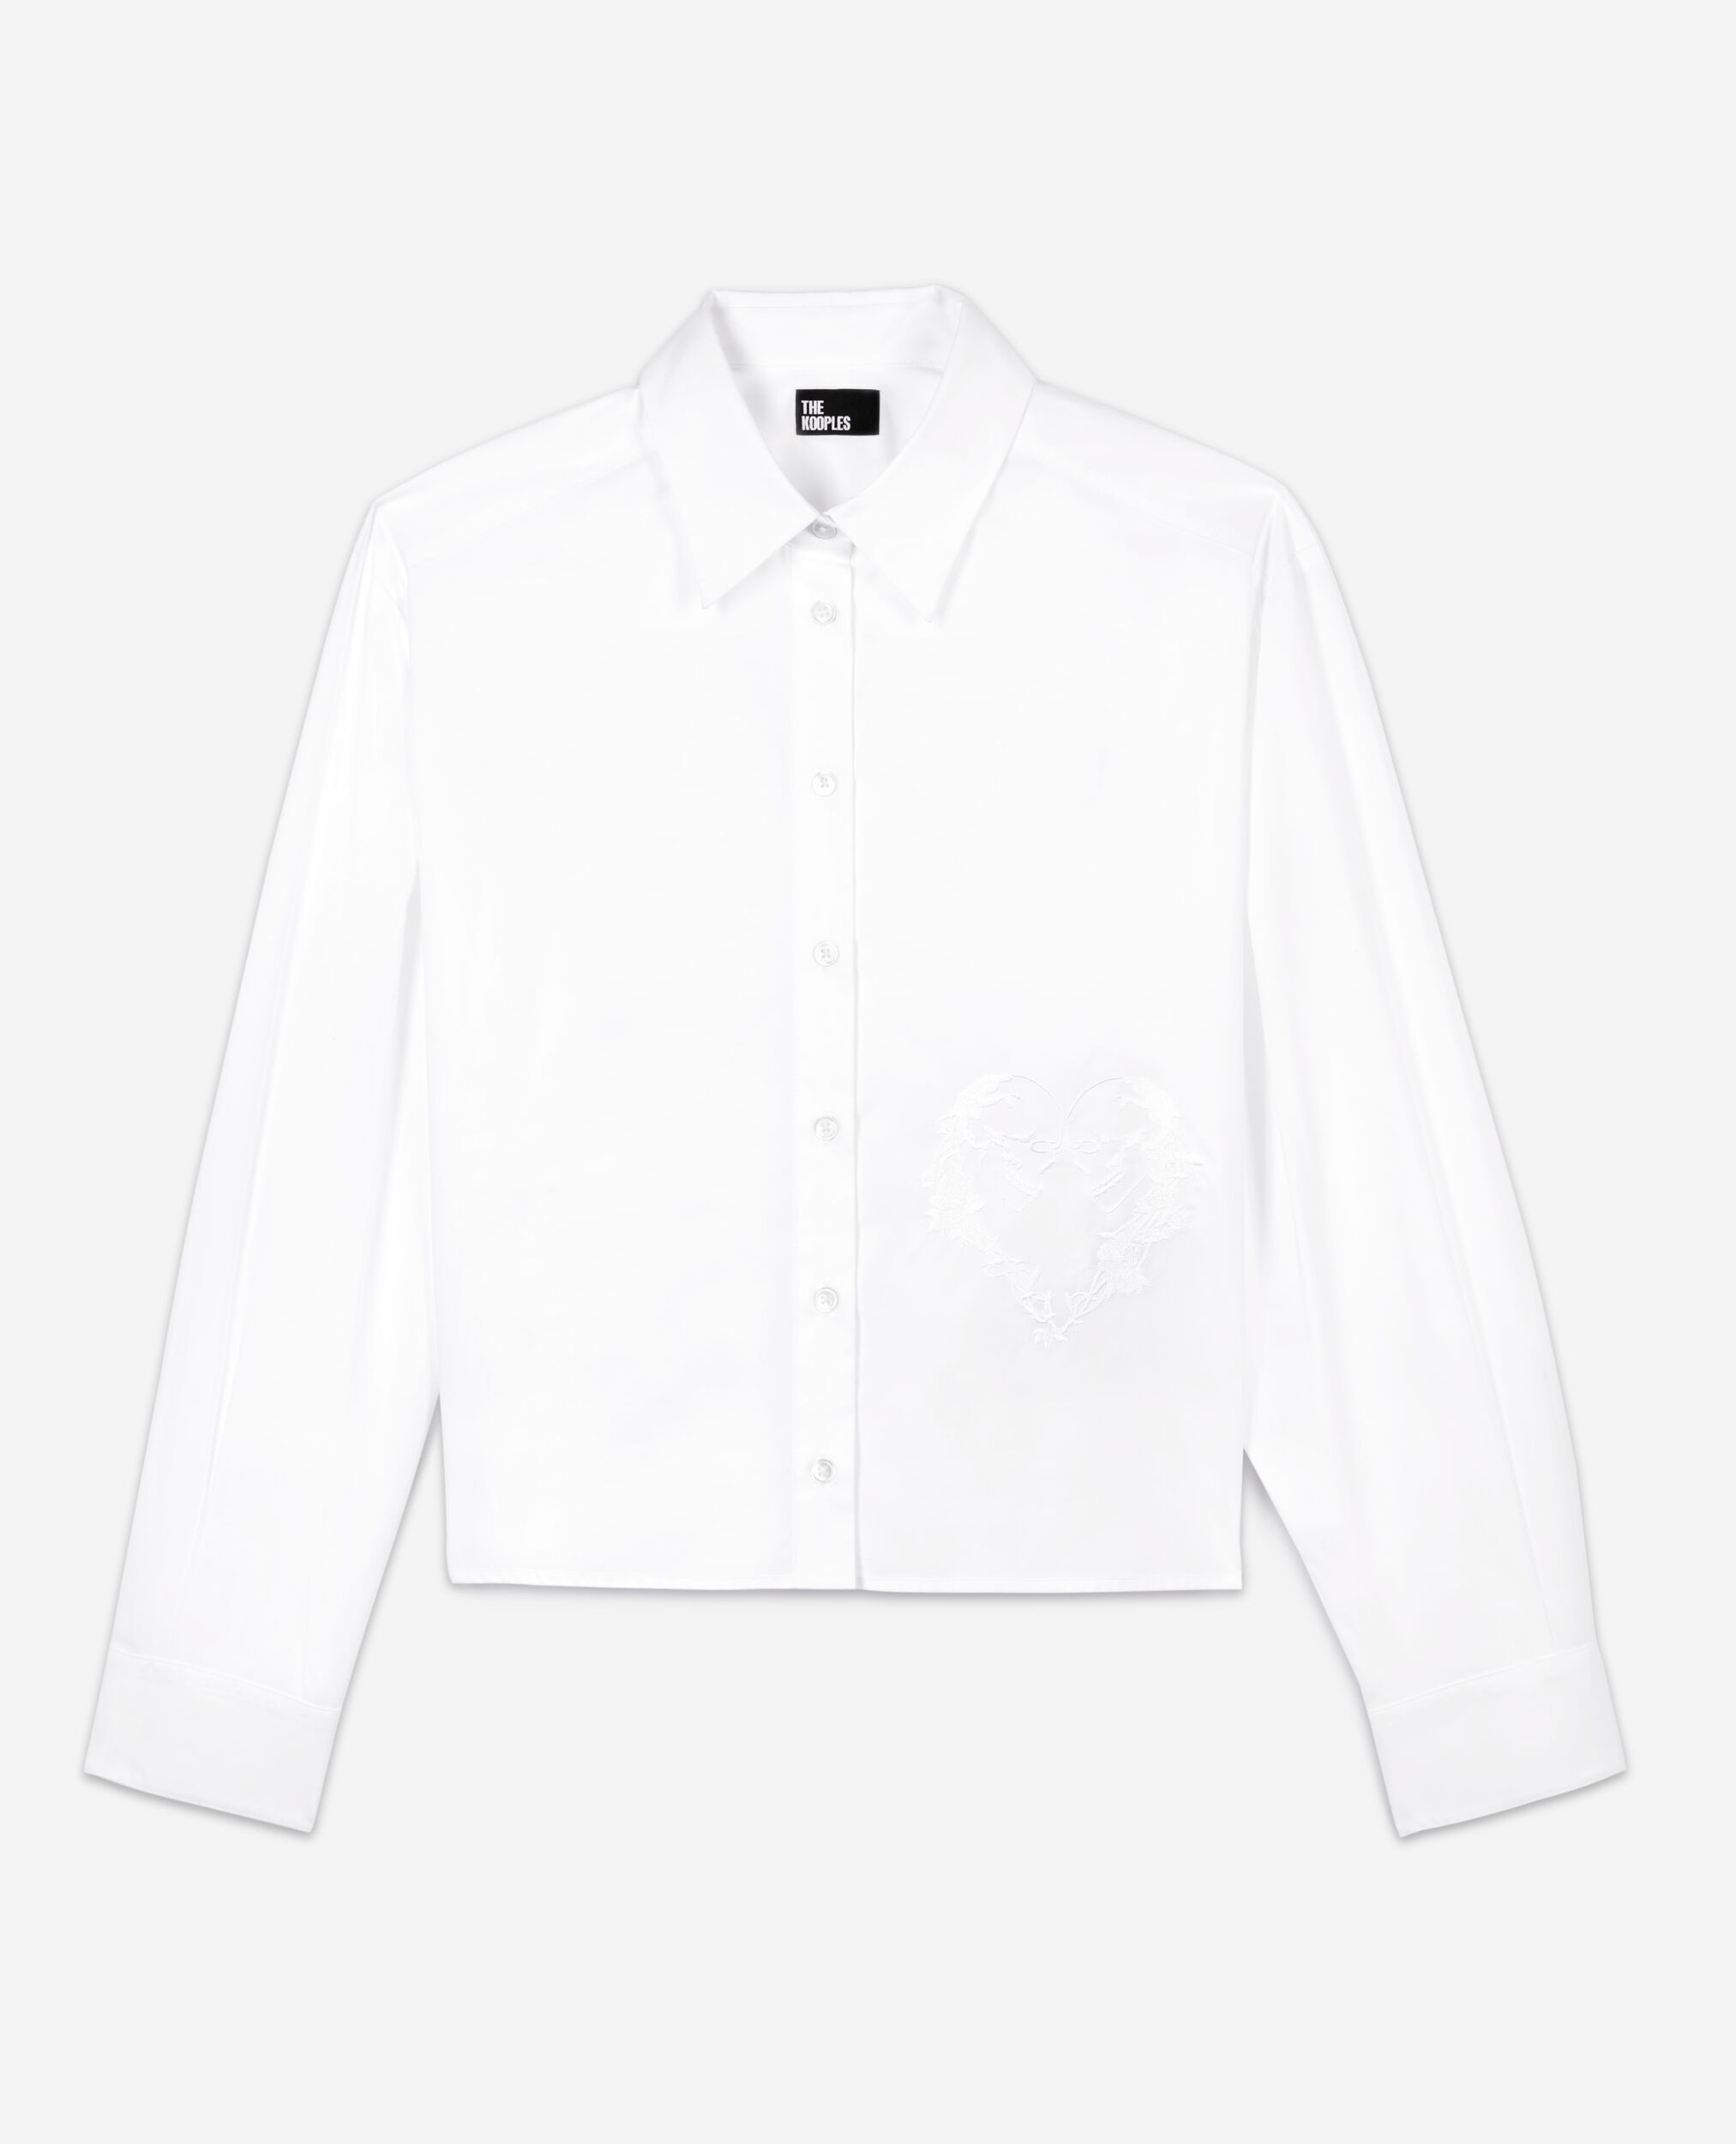 White shirt with Skull heart embroidery, WHITE, hi-res image number null